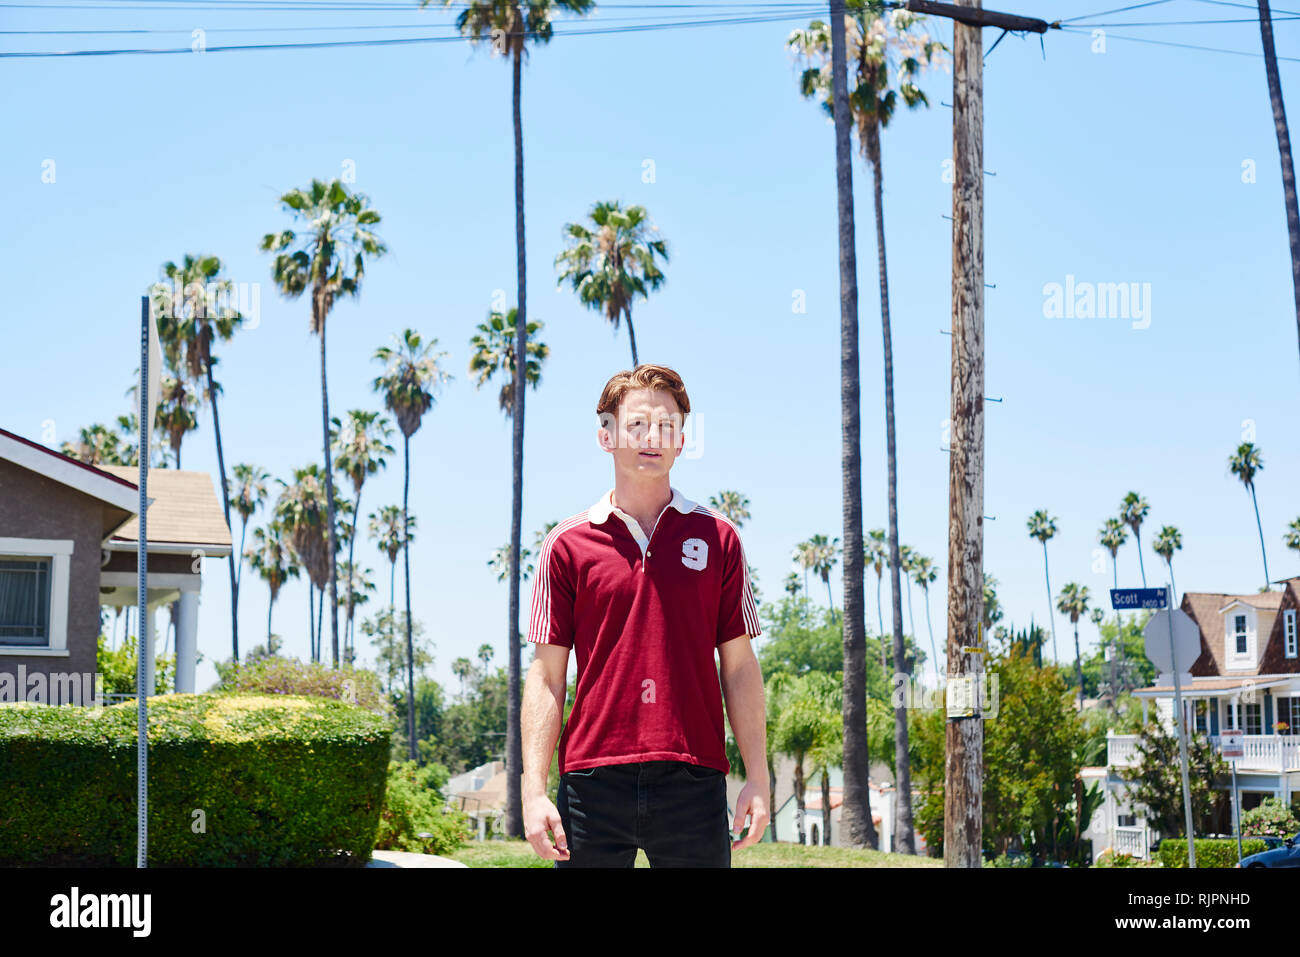 Young man in suburbs, Los Angeles, California, USA Stock Photo